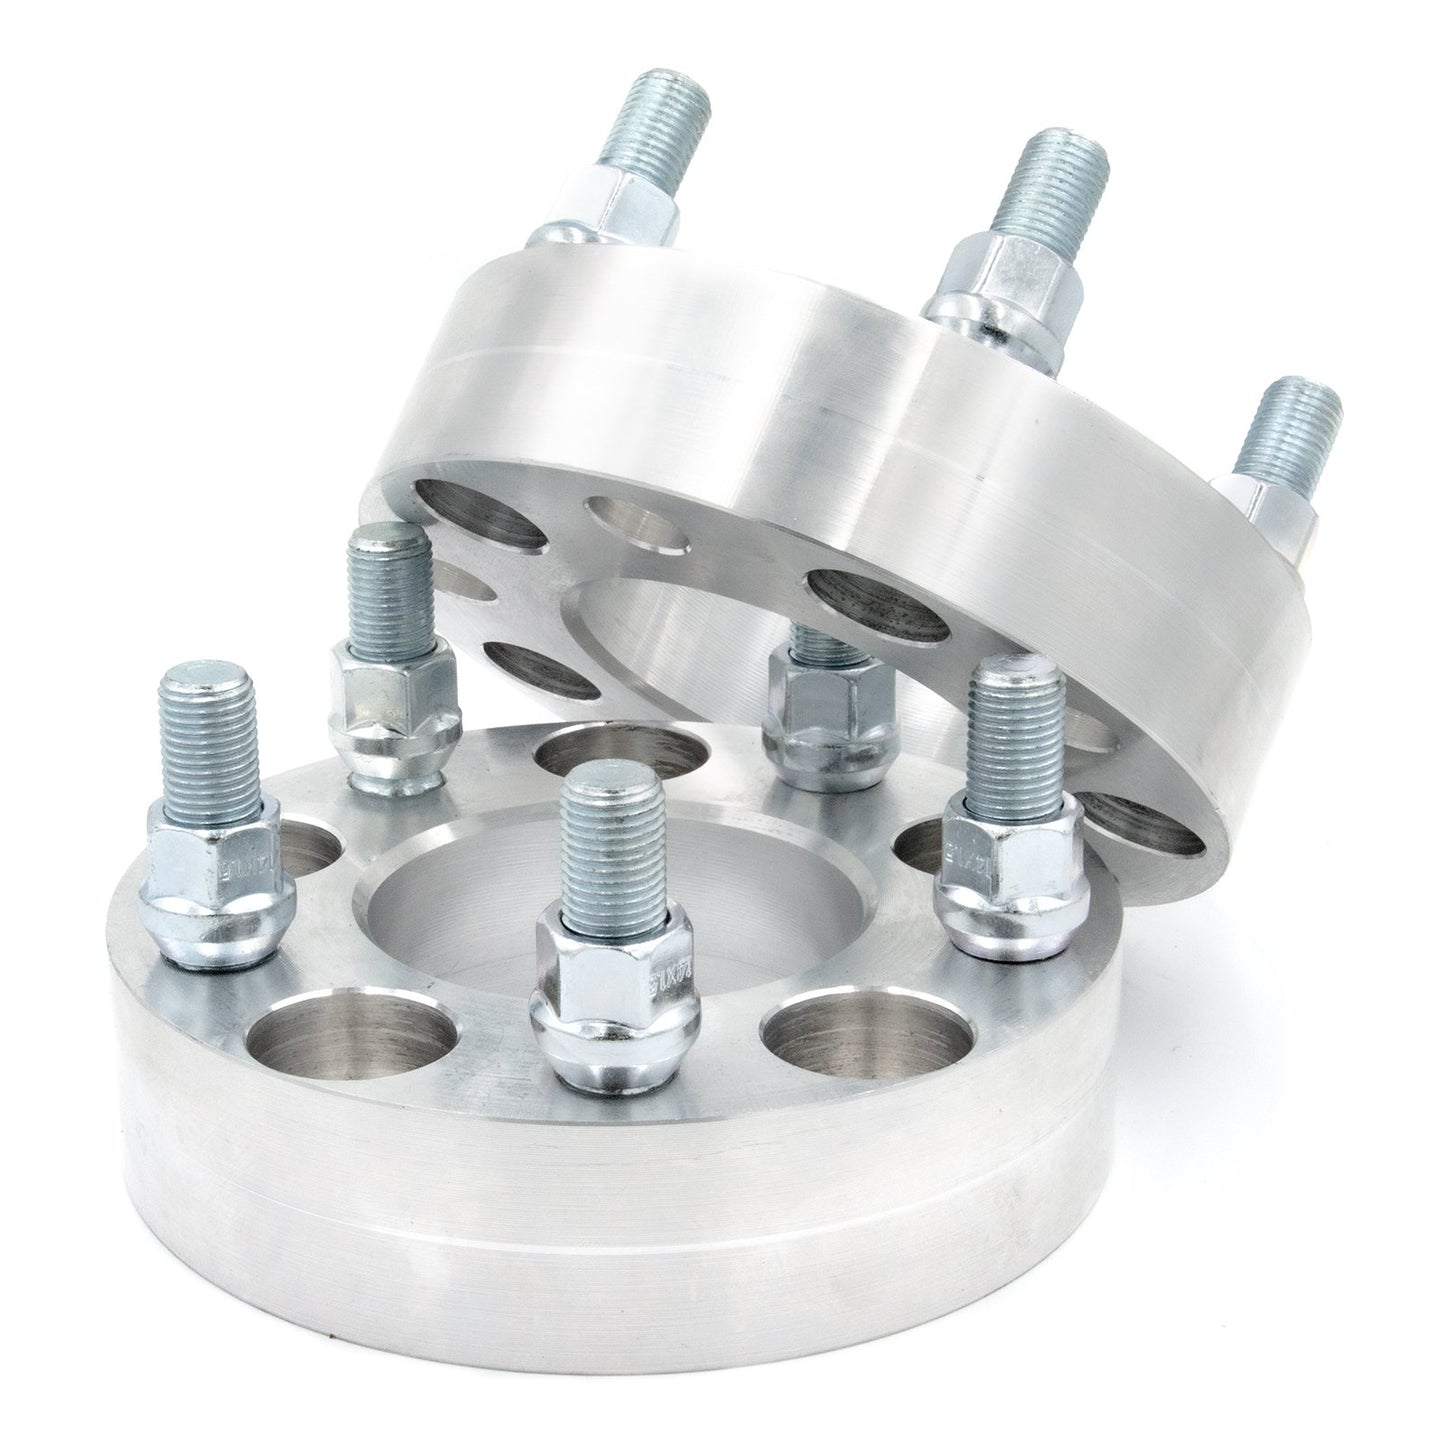 5x135 to 5x120 Wheel Spacer/Adapter - Thickness: 3/4"- 4"